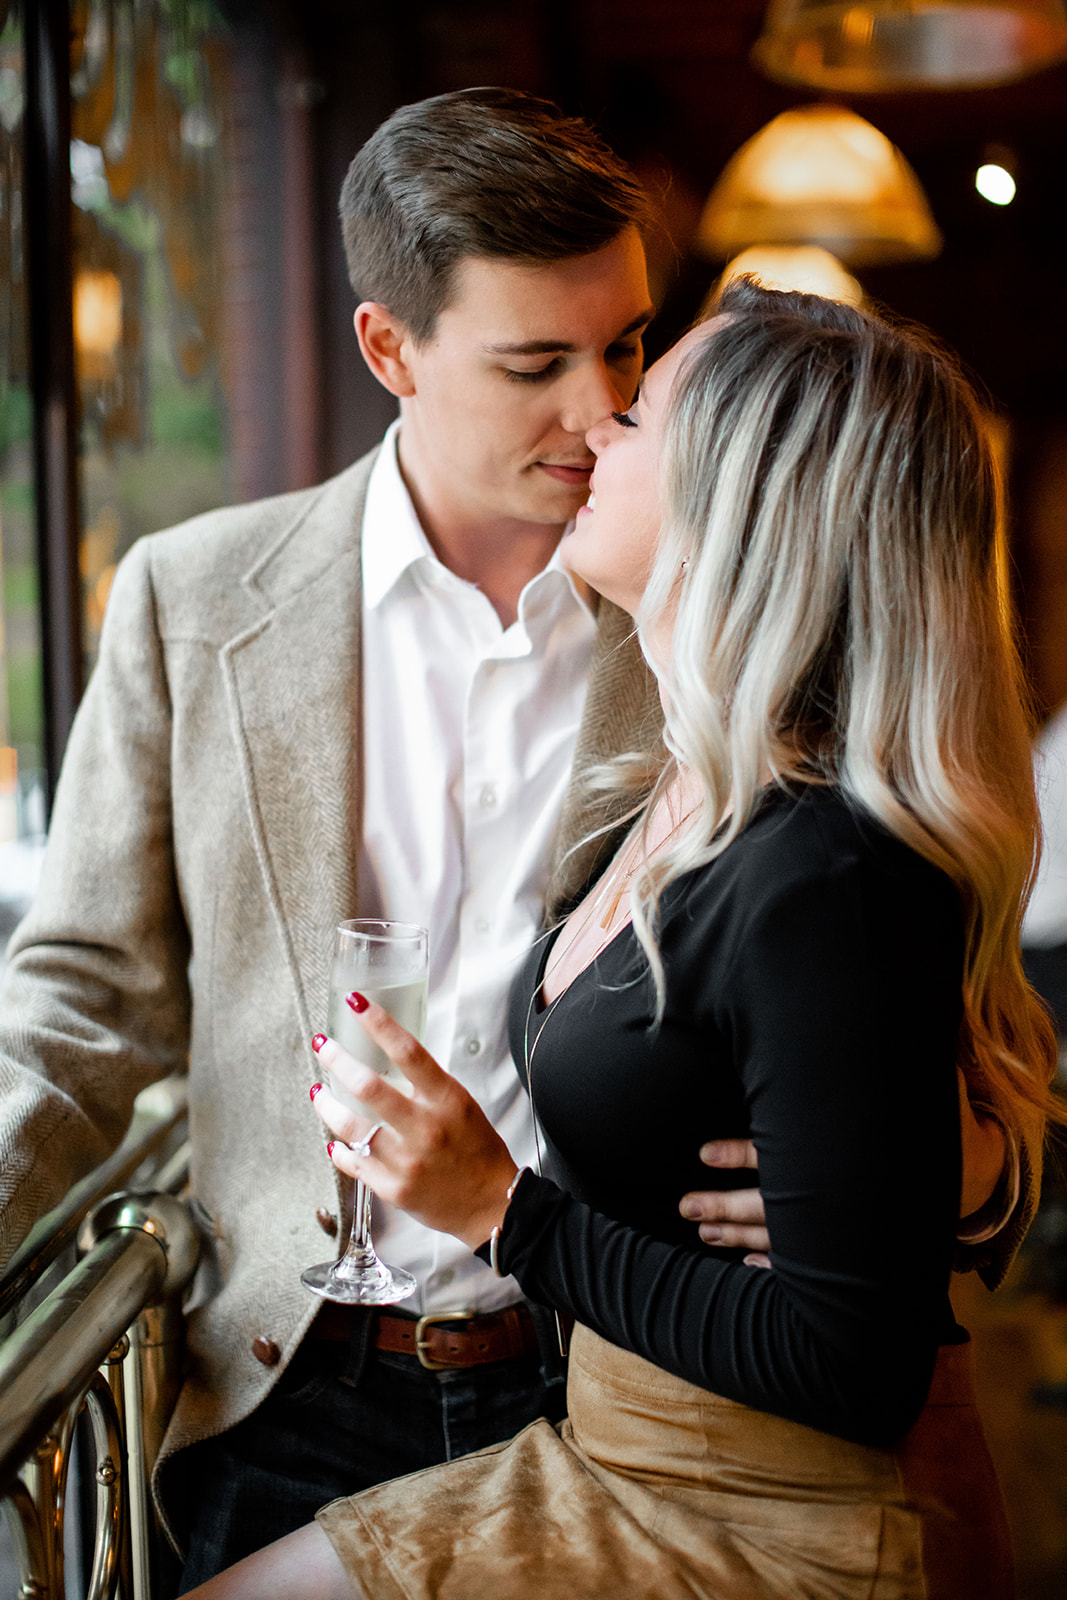 How to Plan a Date Night Engagement Photo Shoot - Image Property of www.j-dphoto.com